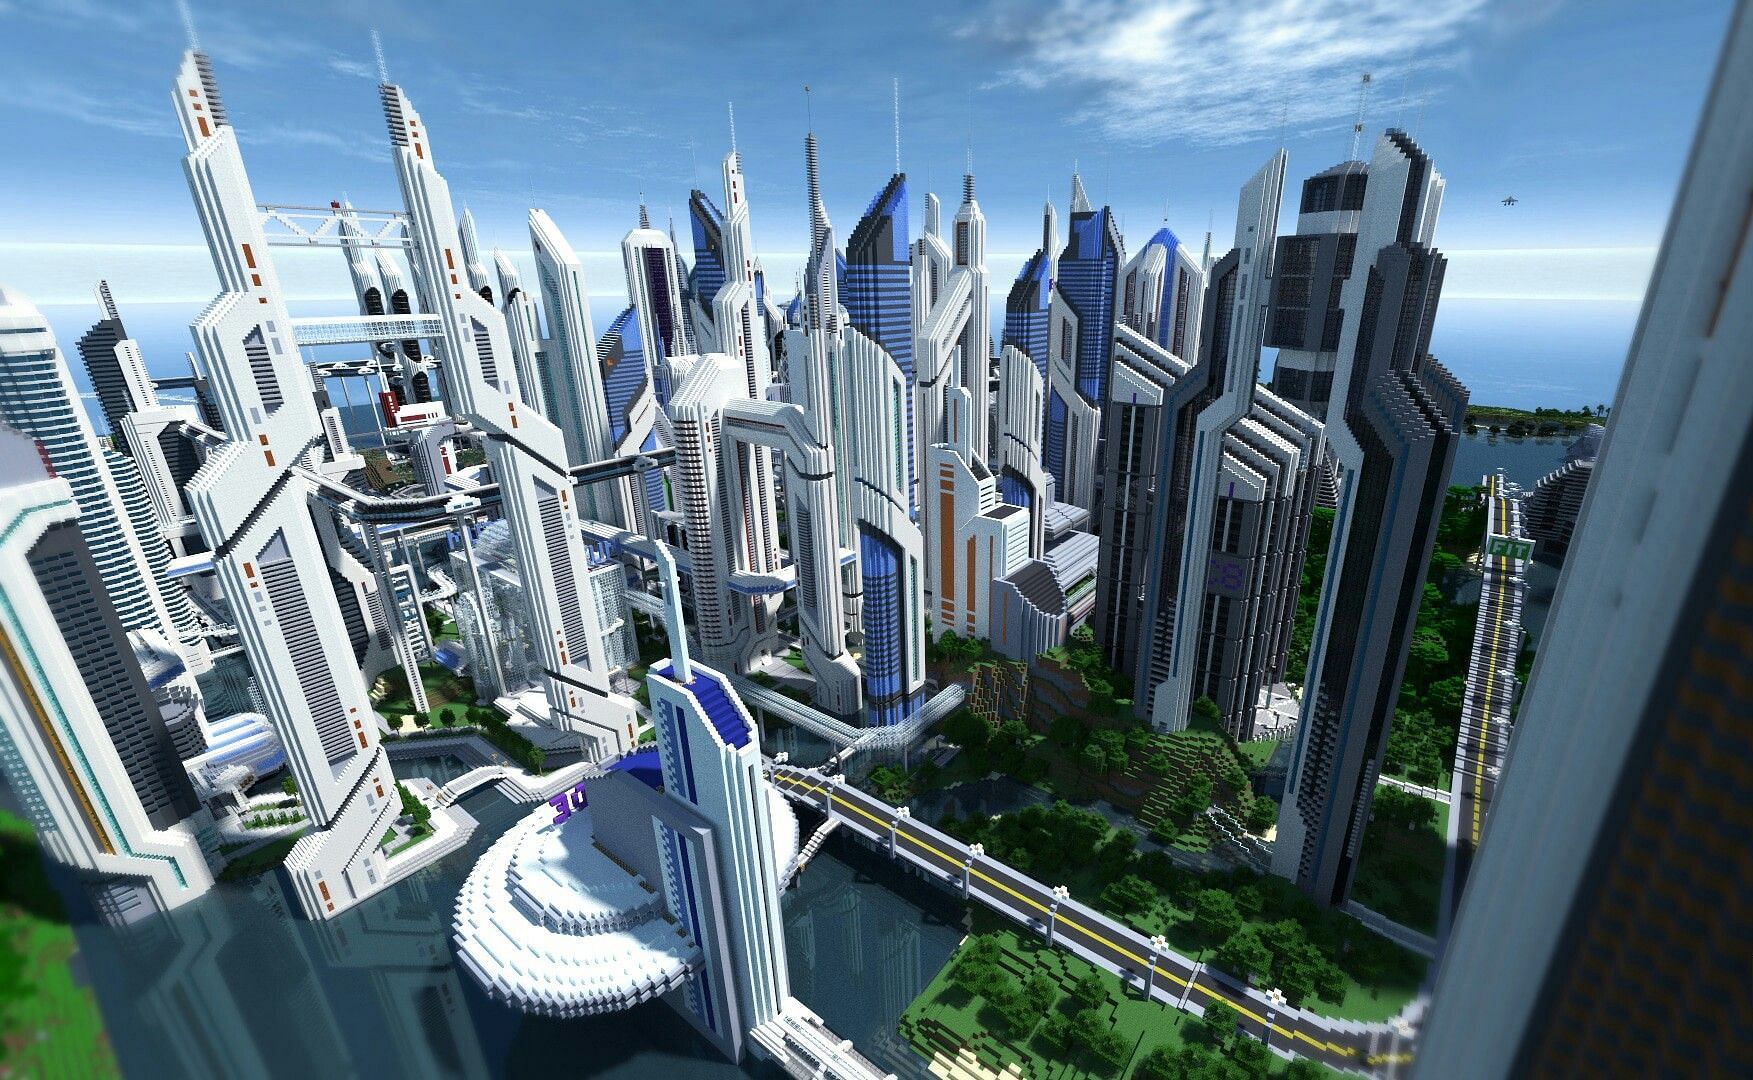 Citybuild Minecraft servers allow players to create cities shaped by their imagination (Image via Minecraft Fanon Wiki)